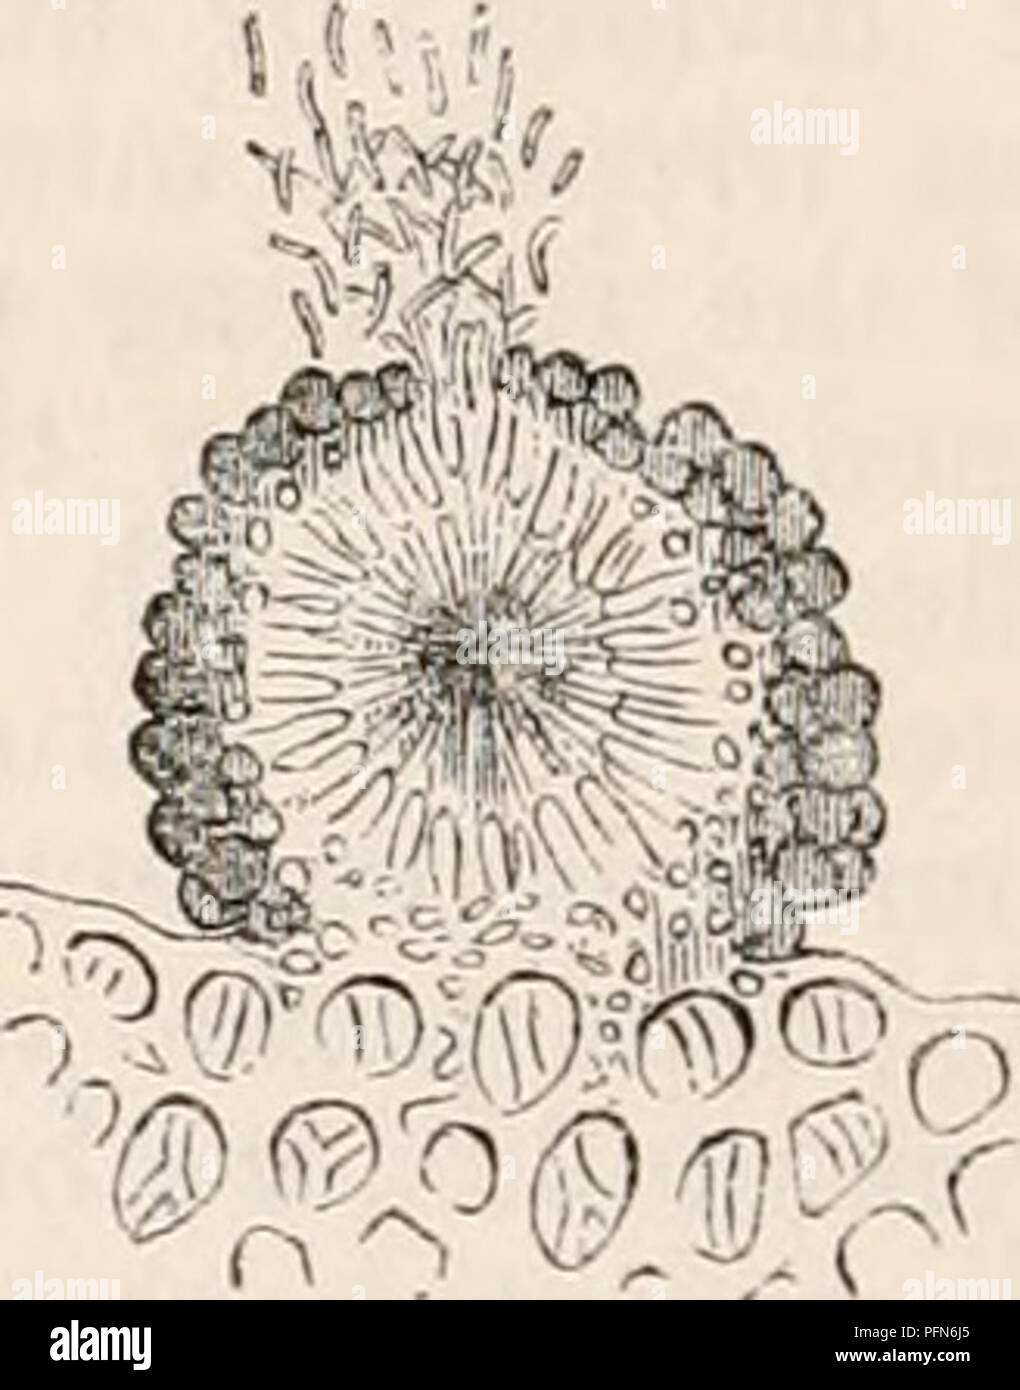 . The cyclopædia of anatomy and physiology. Anatomy; Physiology; Zoology. Section of fruitful thallns of Sticta pulmonacea, about 20 diam. a, discoid apothecium. The vertical lines indicate the lamina proligera; s, spermogouia containing sperniatia; i, empty spermogonia. six to eight cylindrical cells, joined end to end; and secondly, the thecce, which are obovate vesicles, each containing, almost in- variably, eight spores. These elements are arranged side by side, their long diameters being perpendicular to the surface of the apothecium. They appear to be glued toge- ther, even in the fully  Stock Photo